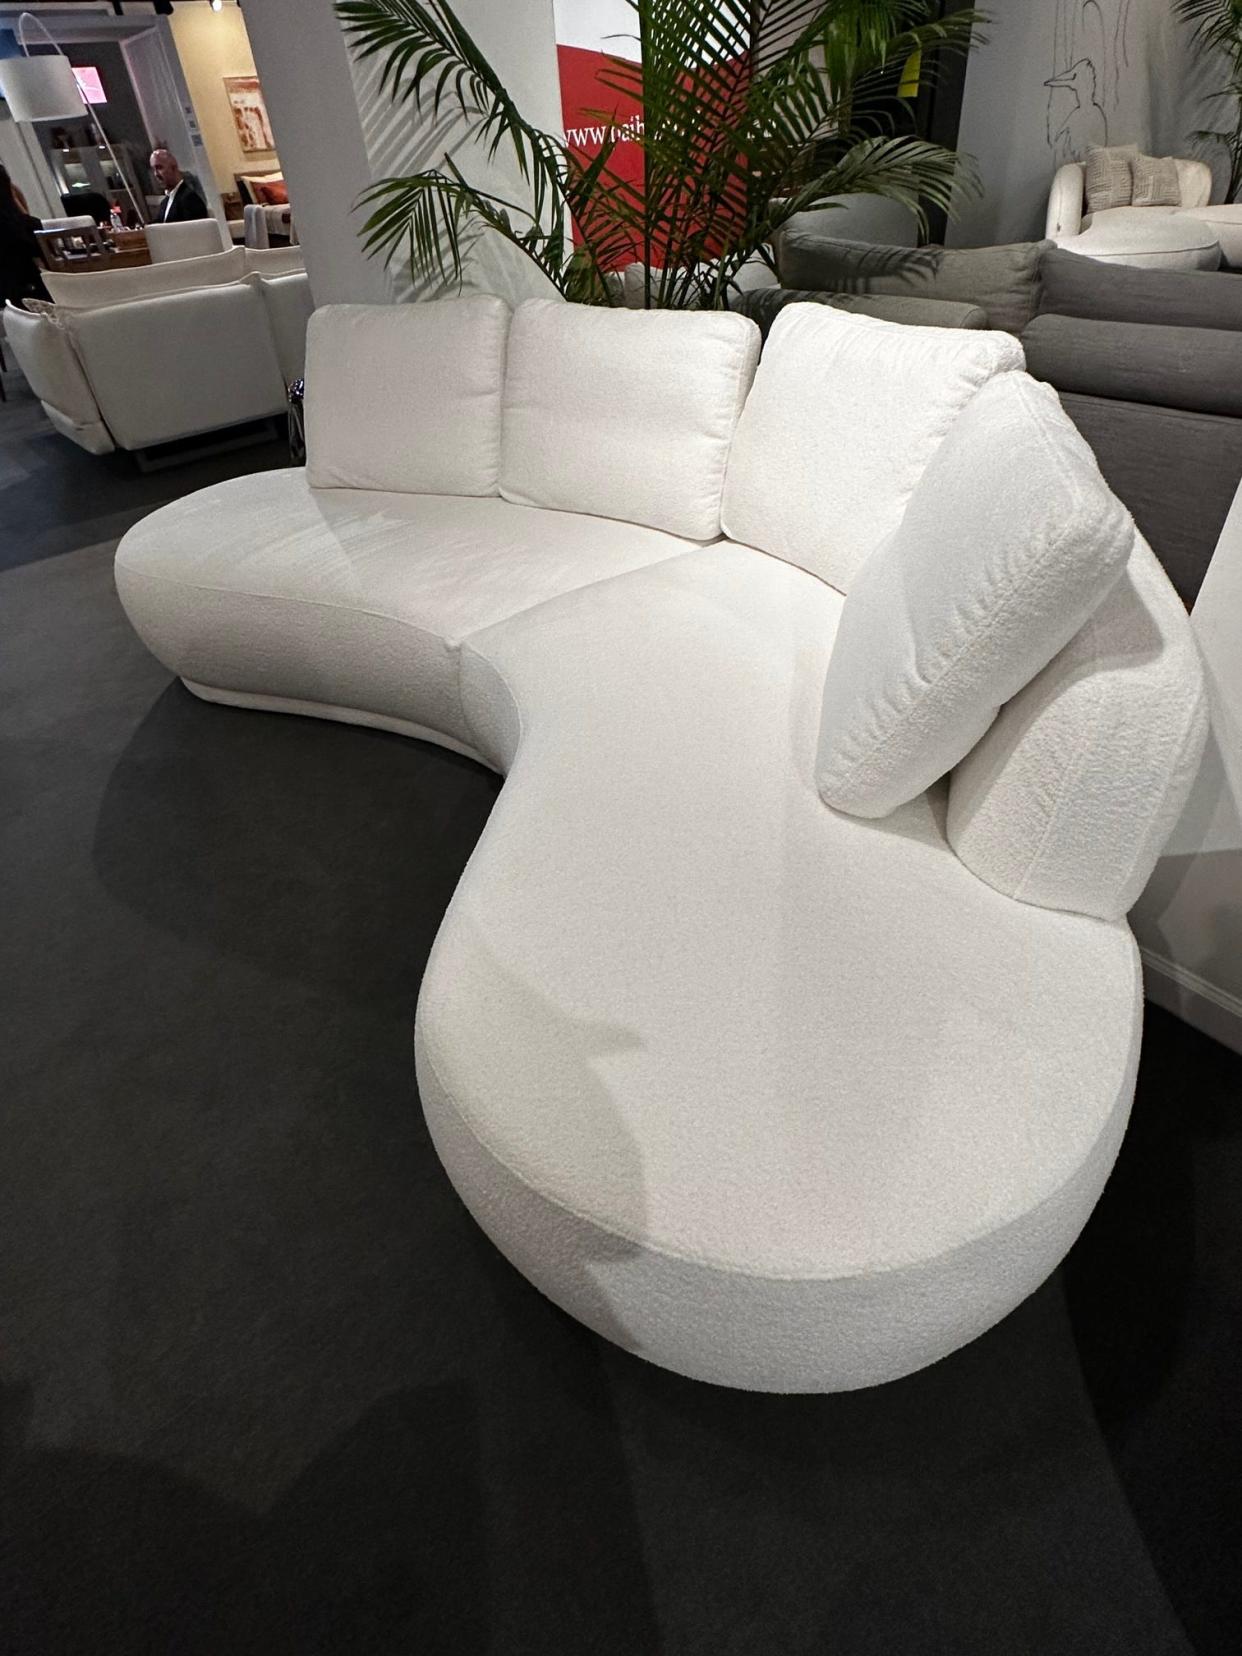 Organic curves of a sofa featured at High Point's Polish Furniture Association reflects organic curves that help reduce stress.